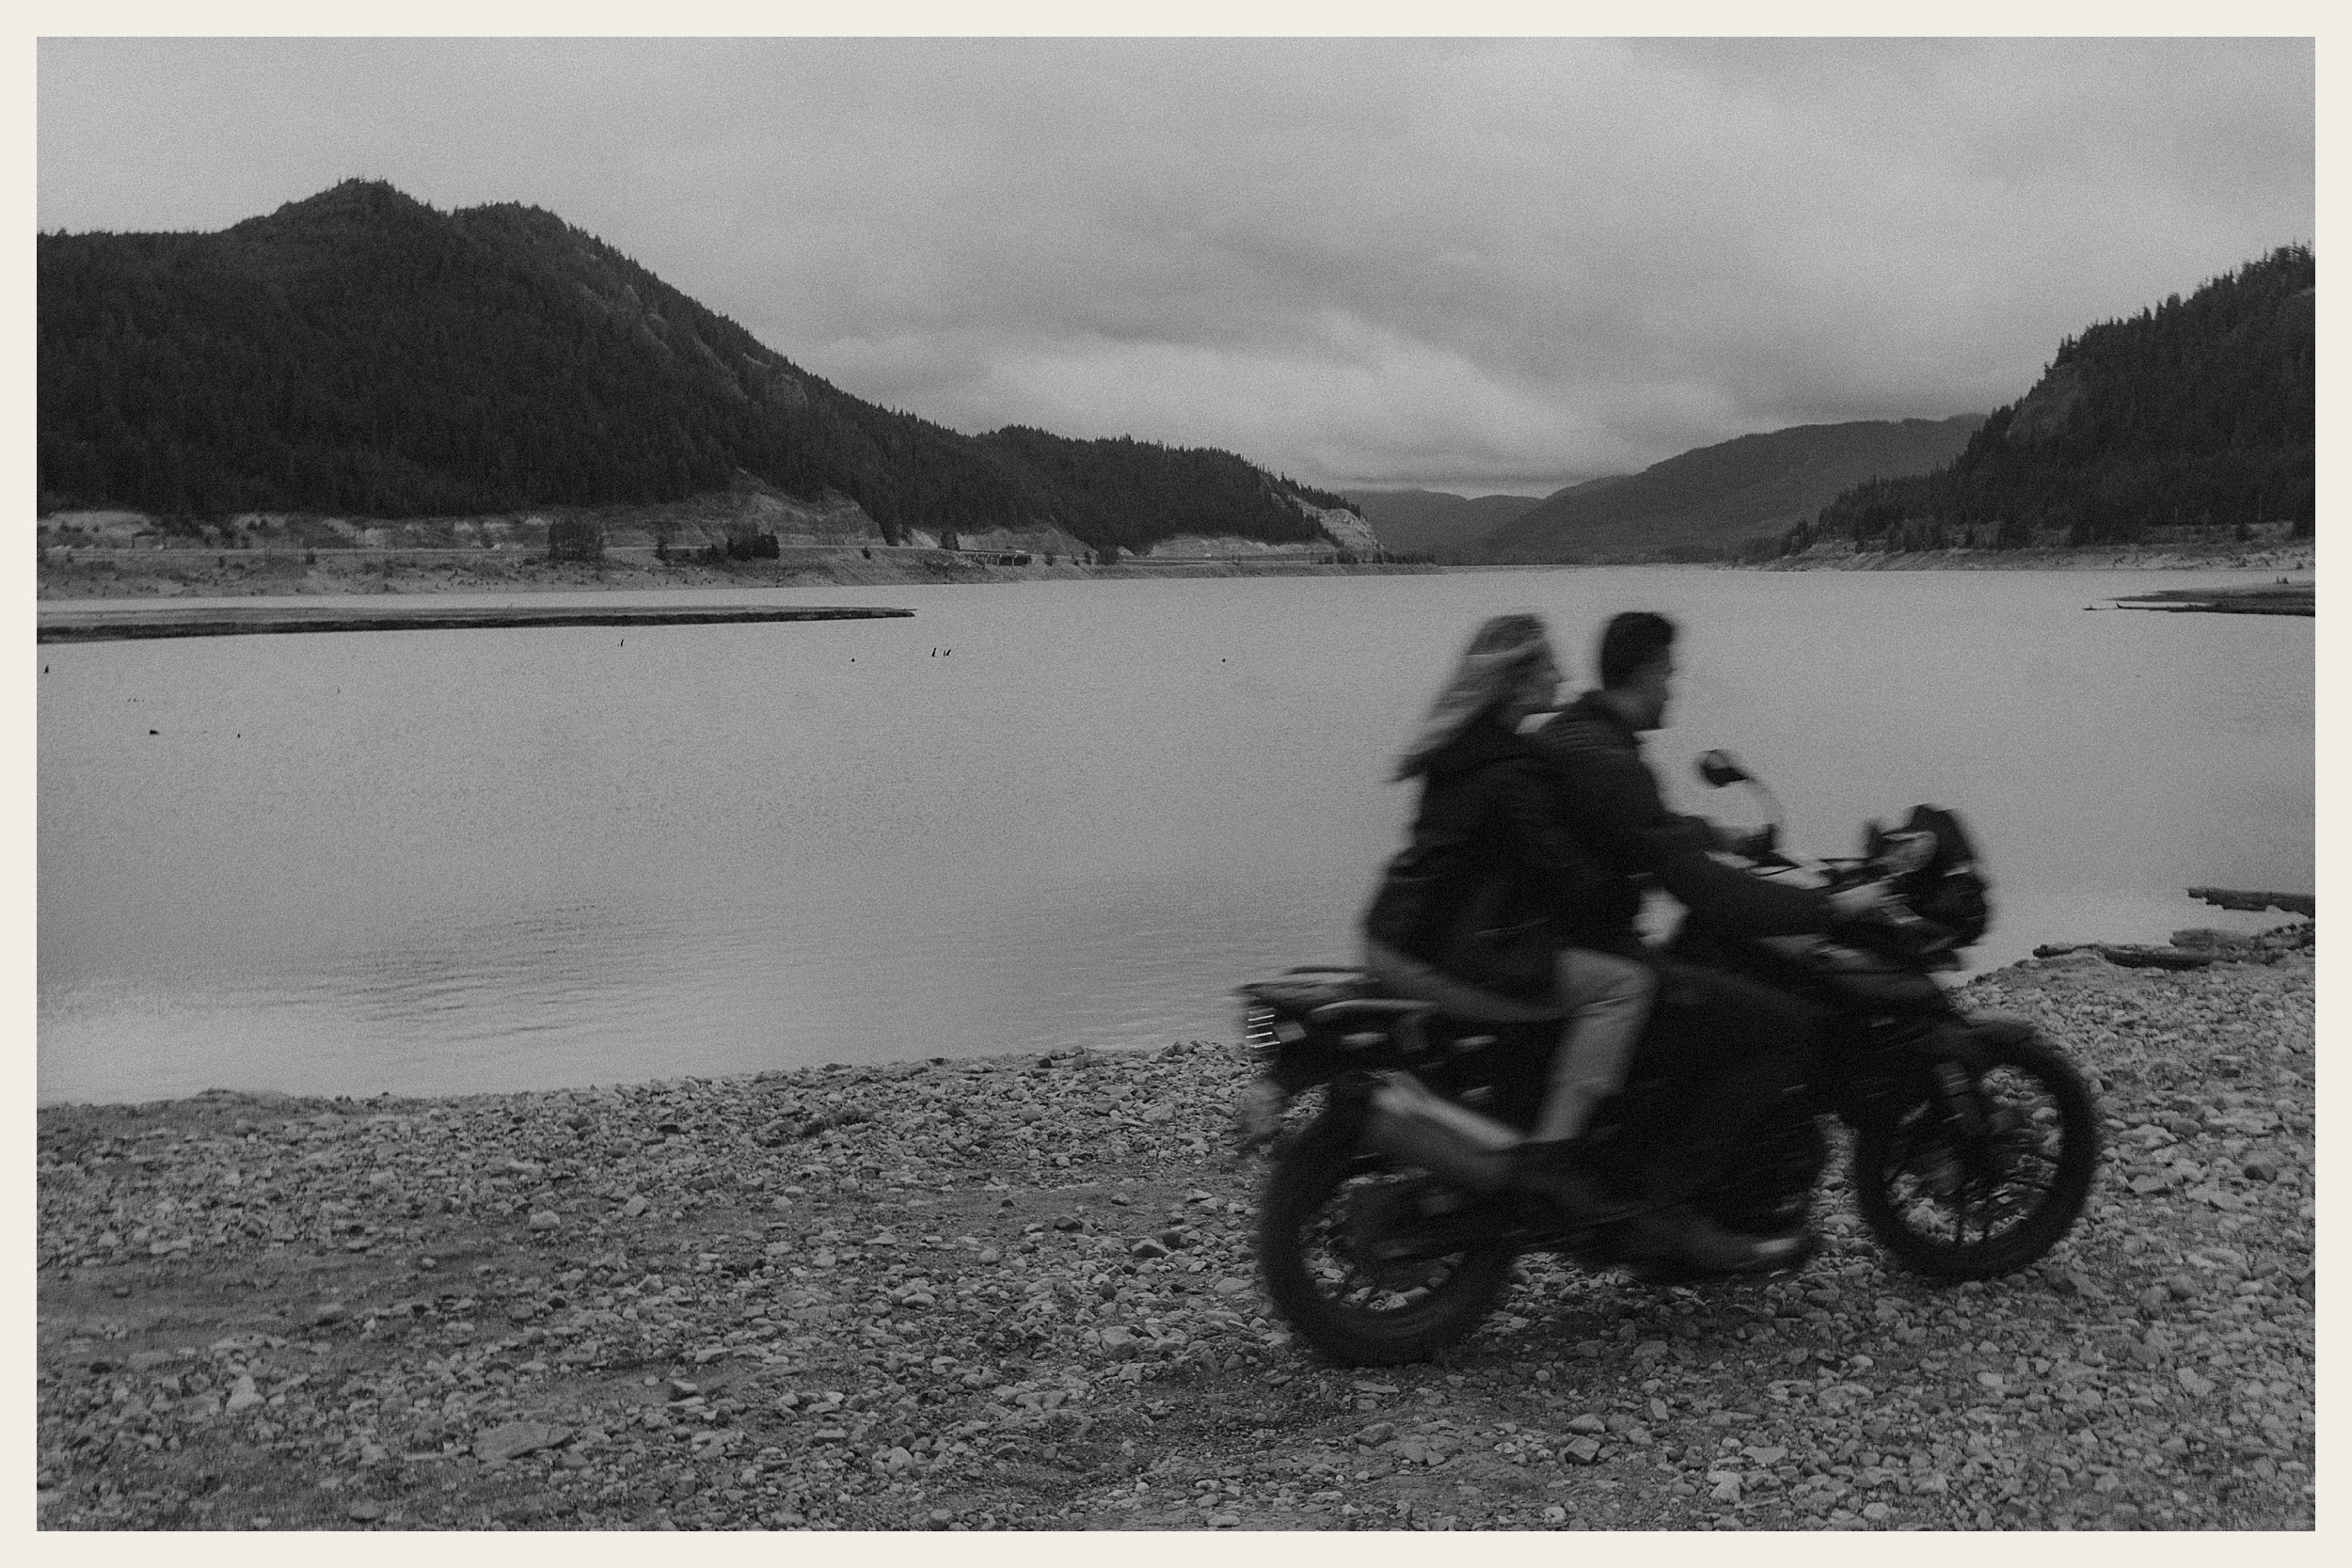 couple riding motorcycle on beach